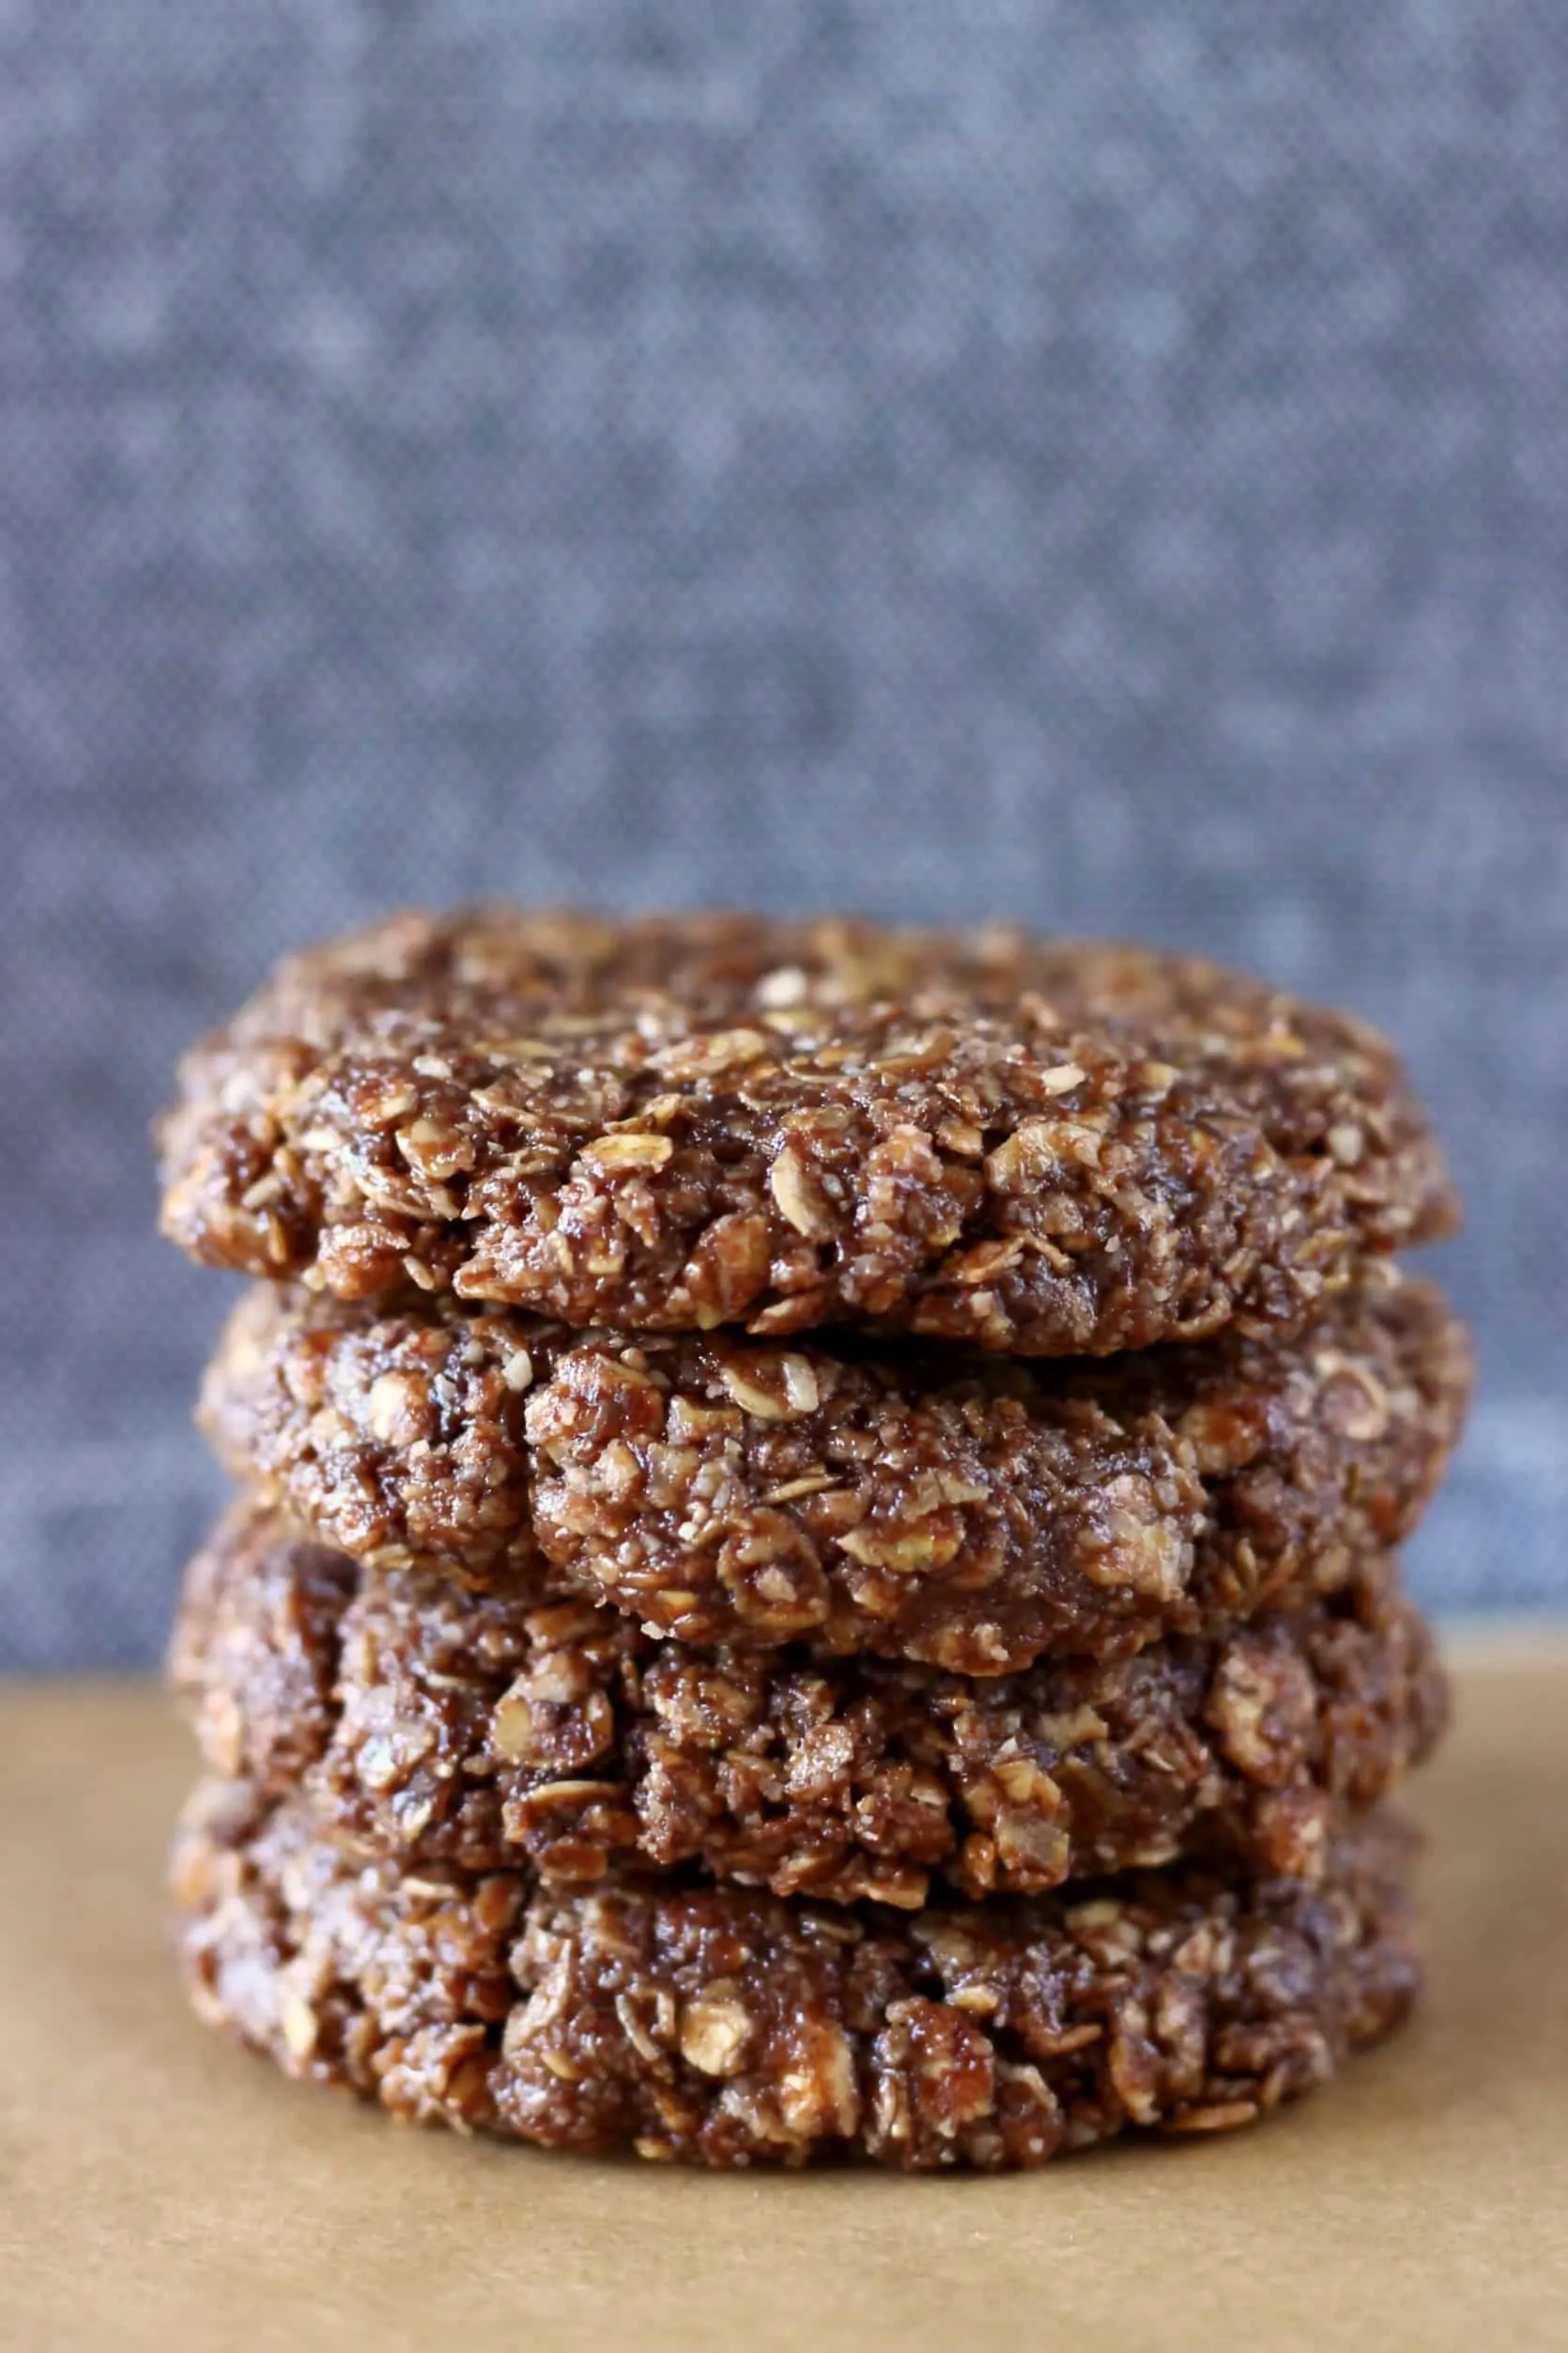 Four chocolate no-bake cookies stacked on top of each other